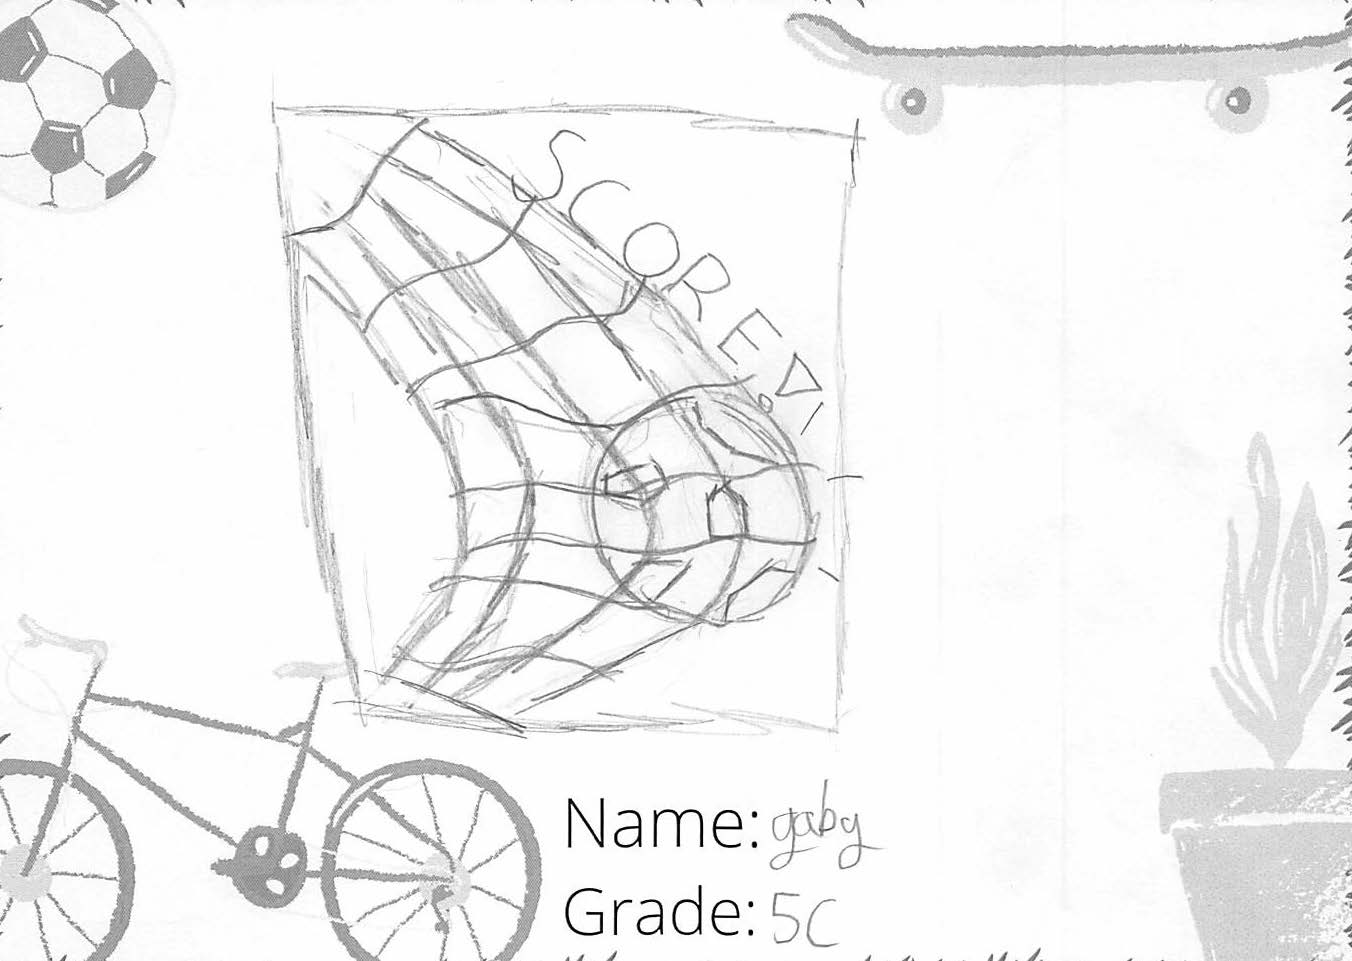 Pencil drawing for the SCORE! logo contest. The drawing includes a soccer ball in a net.